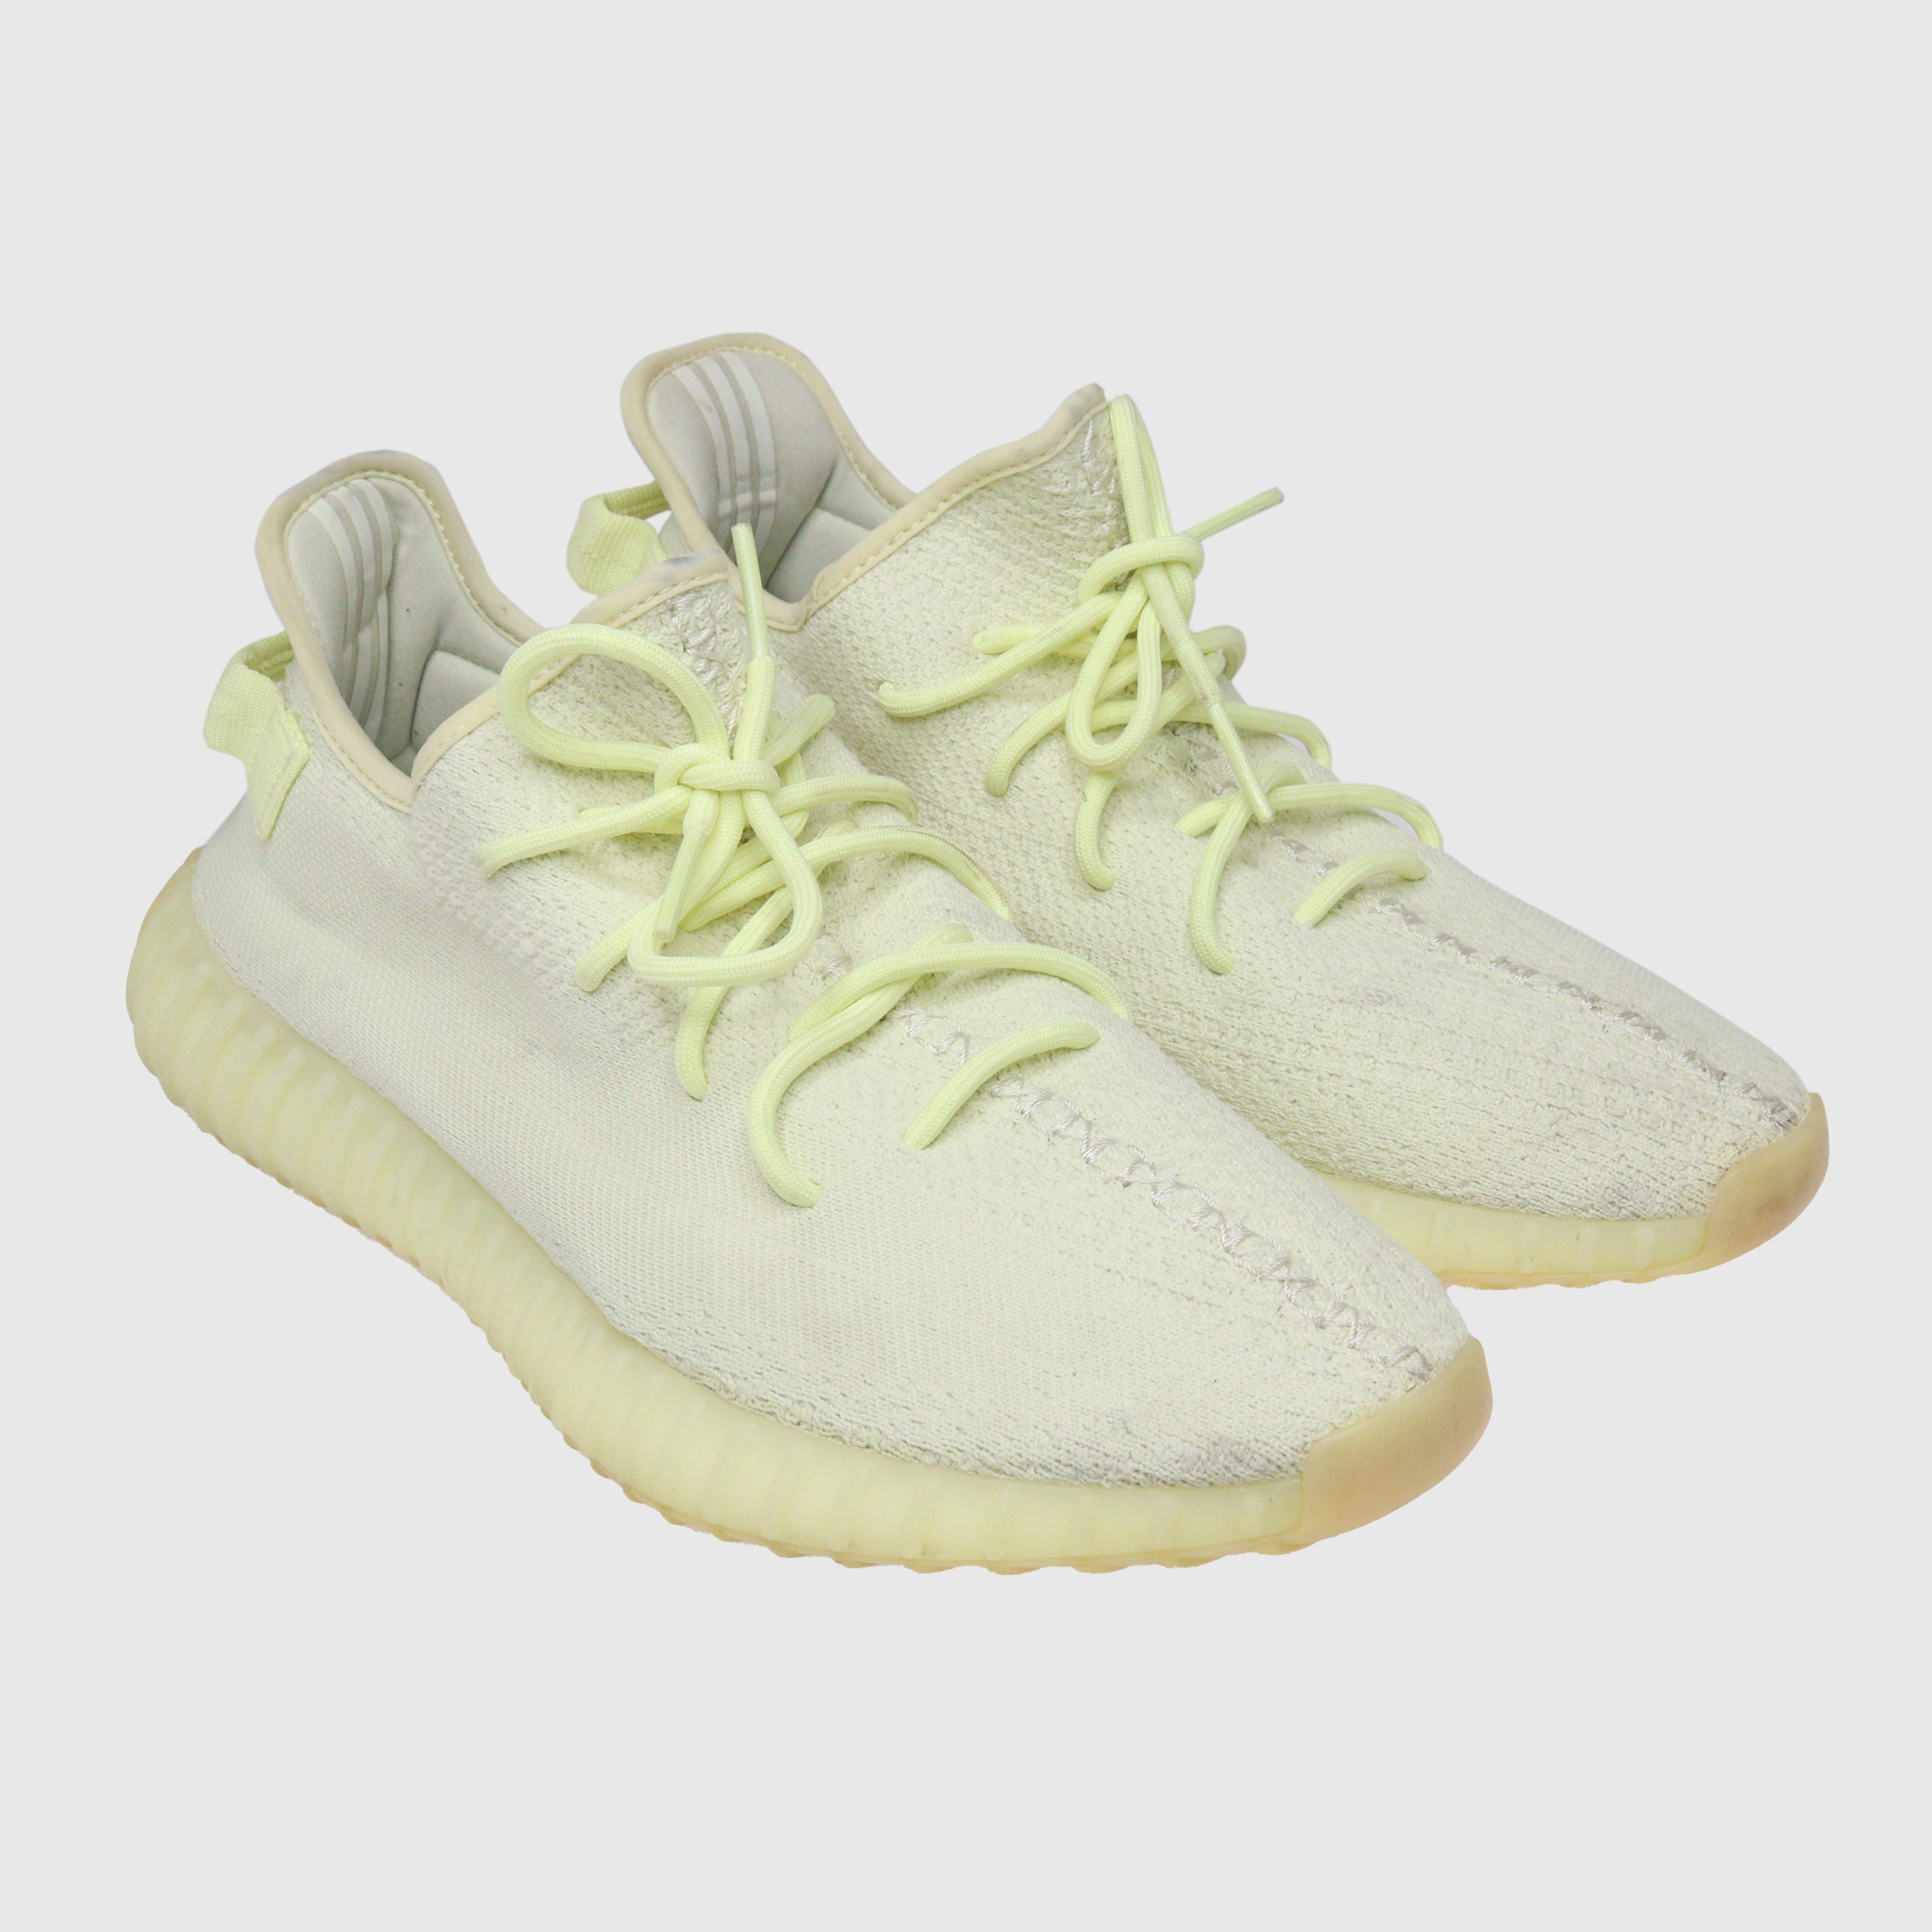 Cream Yeezy Ultra Boots Sneaker Shoes Adidas 